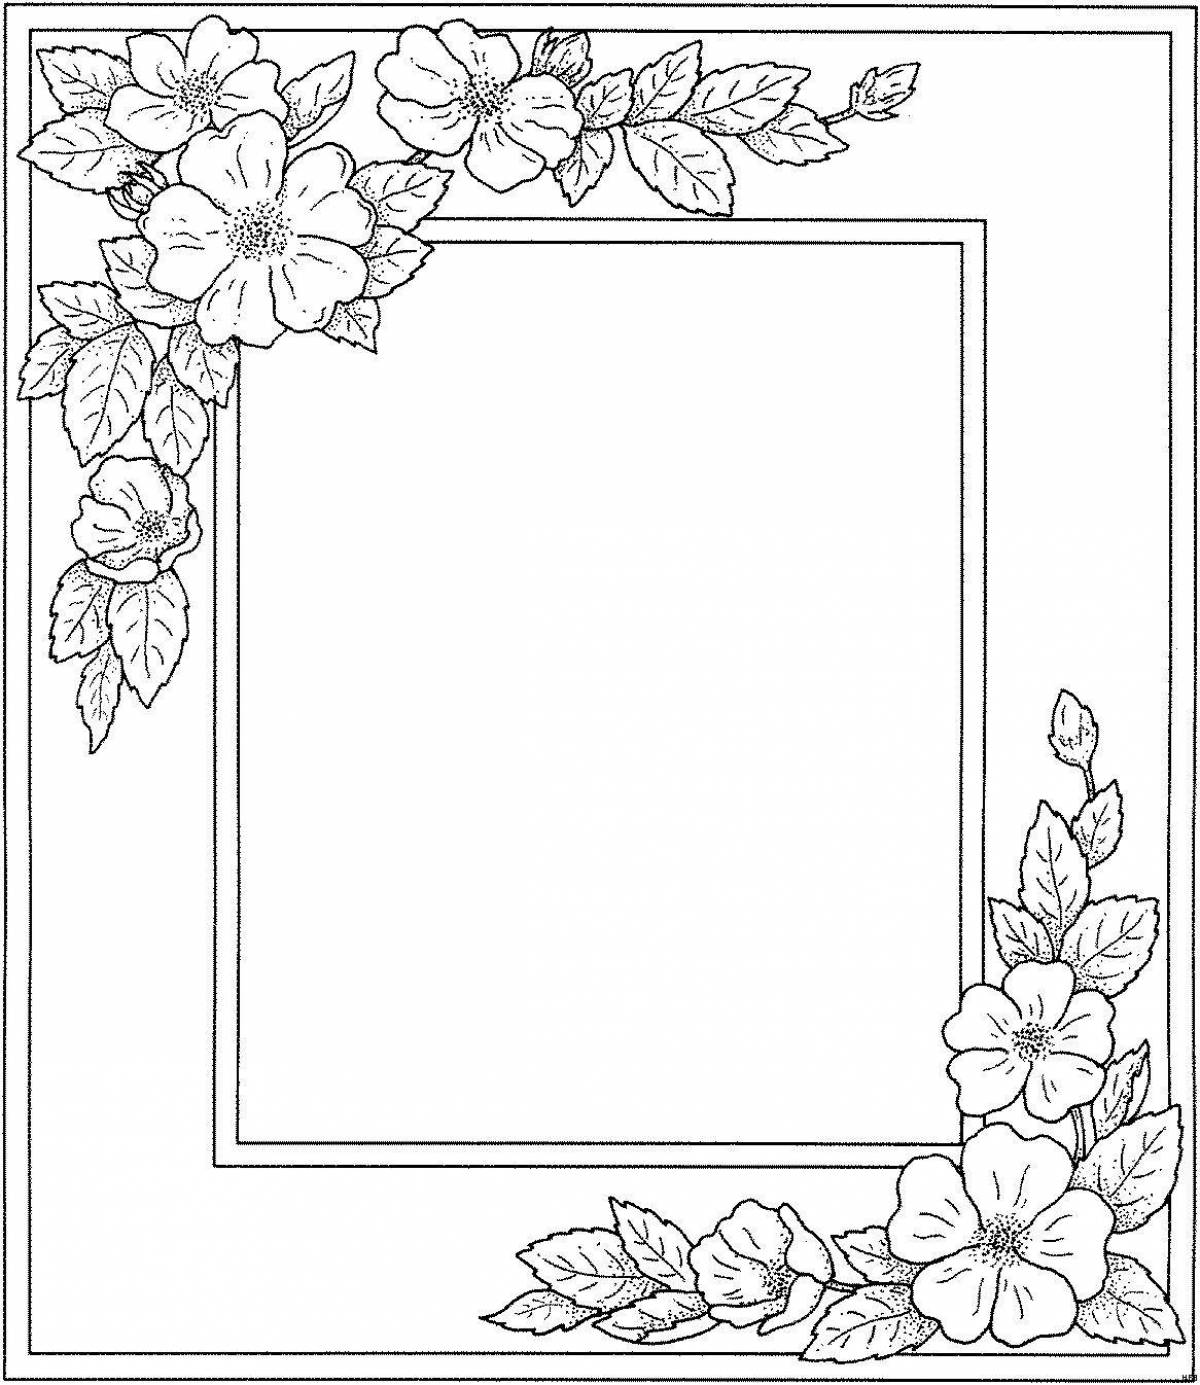 Coloring book decorated portrait frame